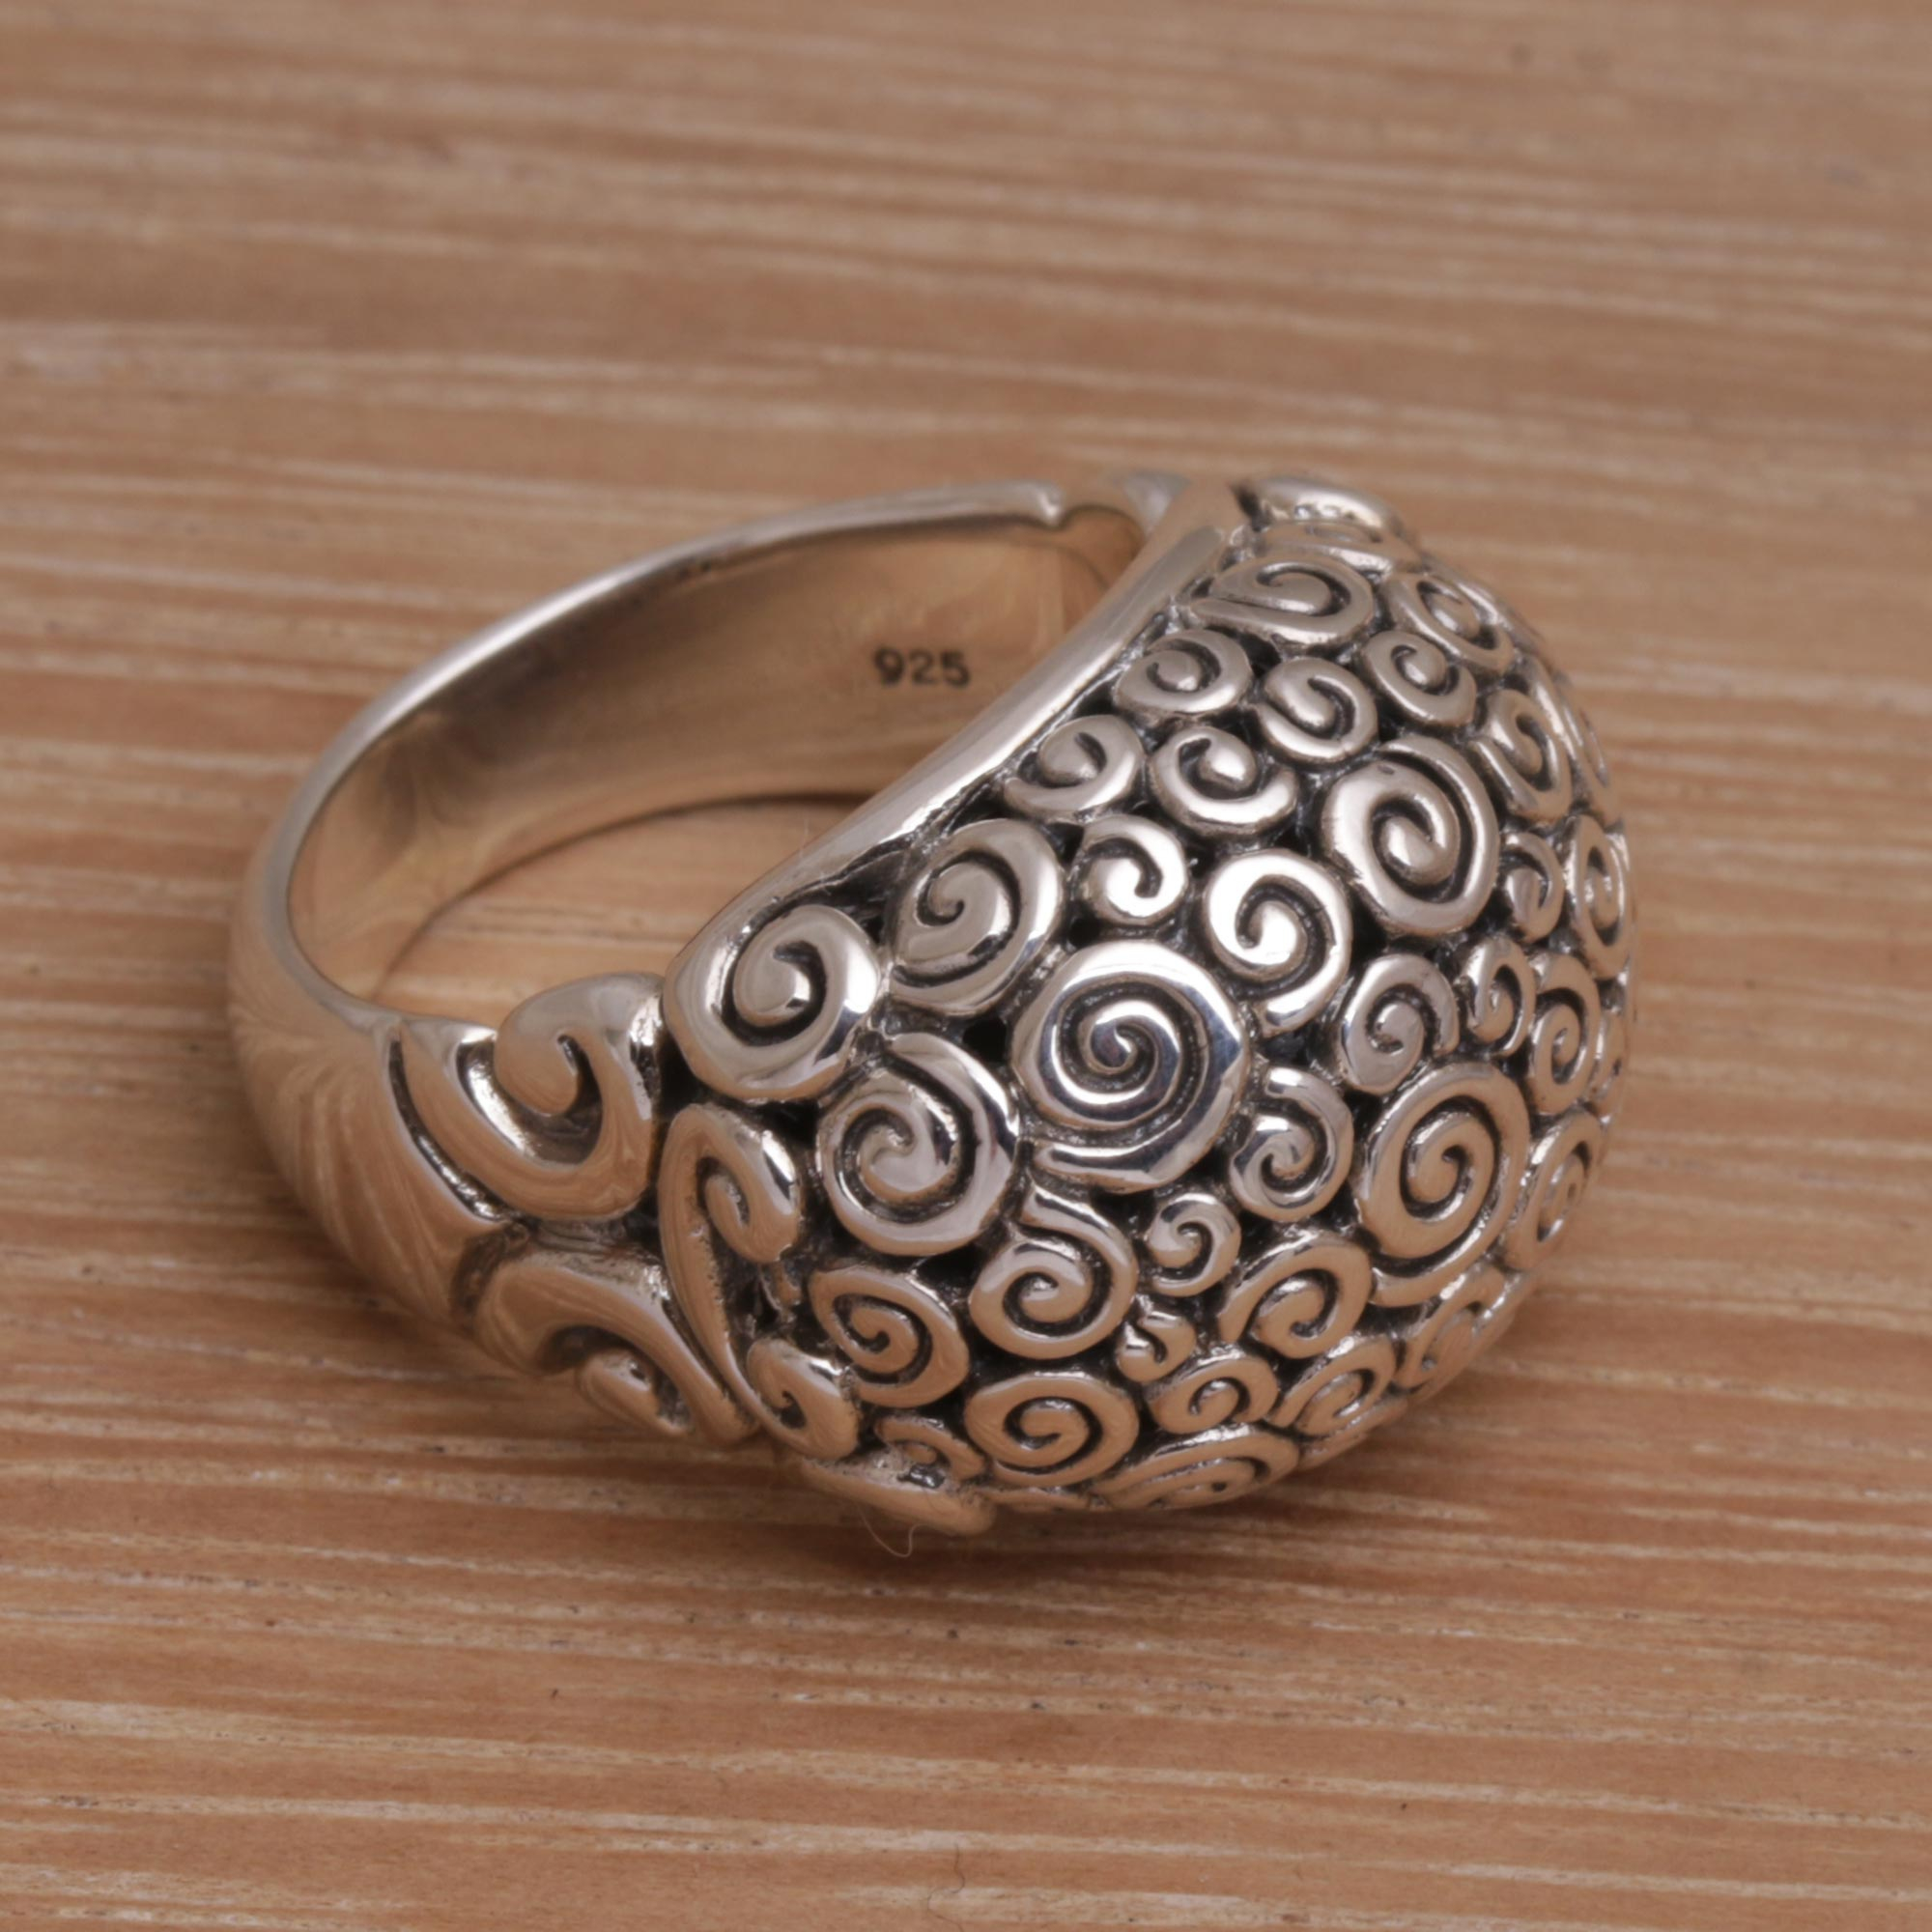 UNICEF Market | Artisan Jewelry Sterling Silver Domed Ring - Cloud Bubble